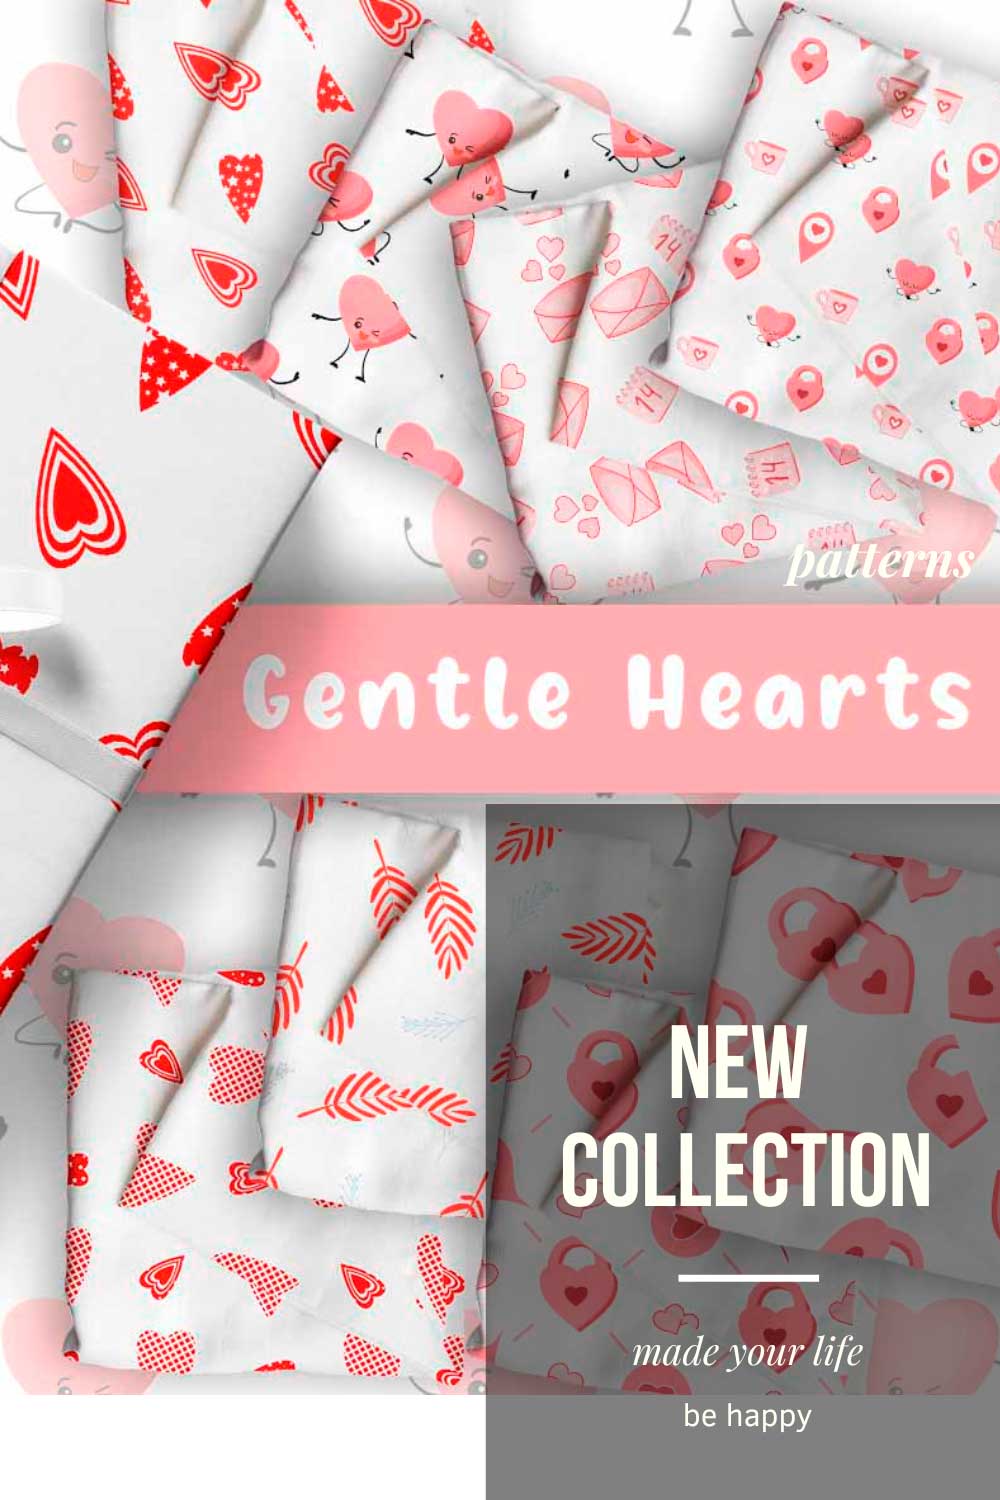 Pack of images of enchanting patterns with hearts.